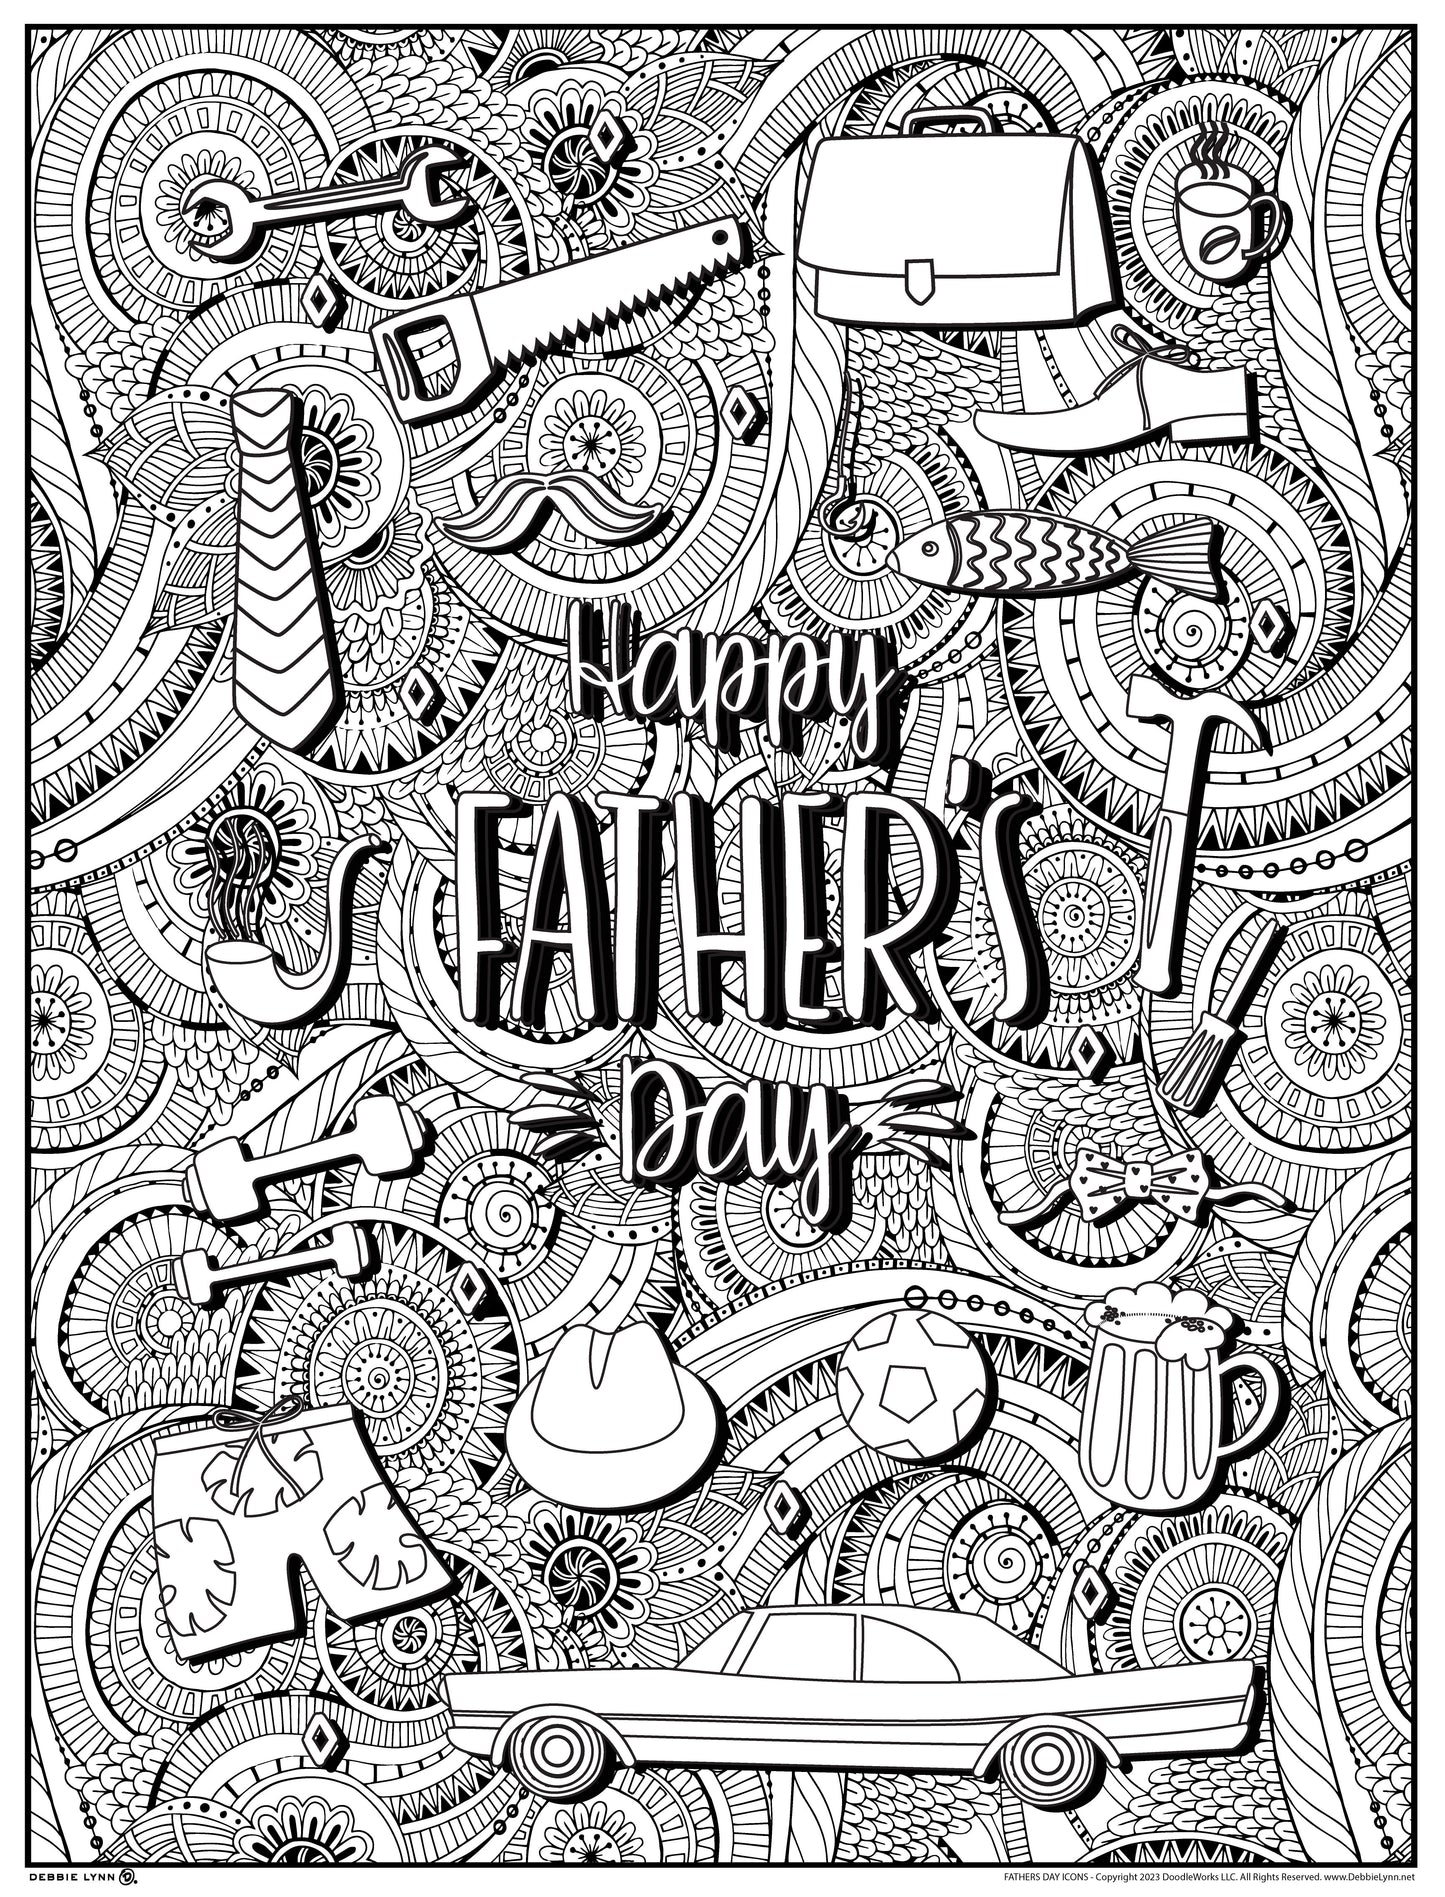 Fathers Day Icons Personalized Giant Coloring Poster 46"x60"